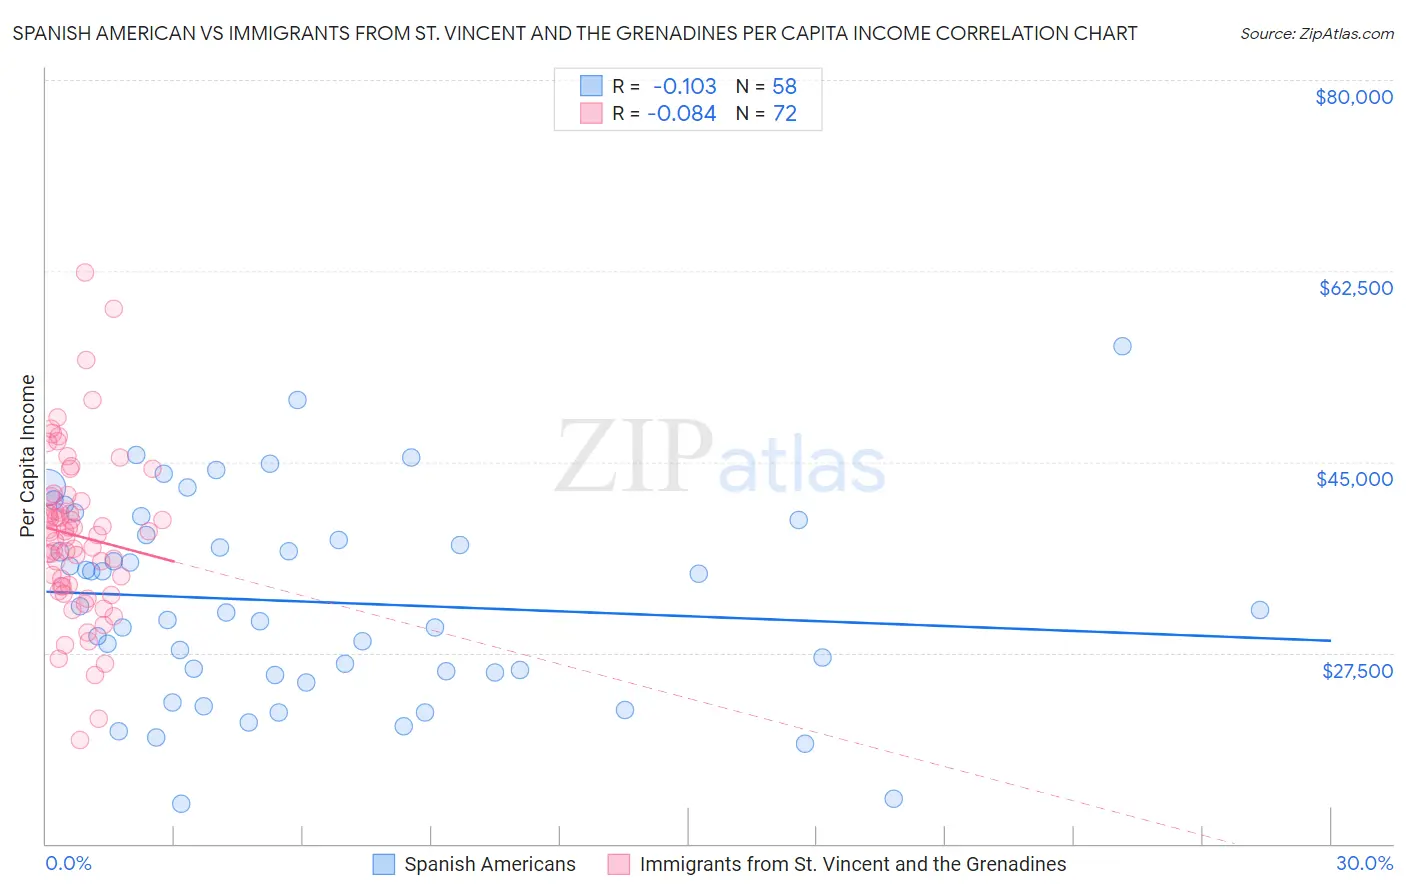 Spanish American vs Immigrants from St. Vincent and the Grenadines Per Capita Income